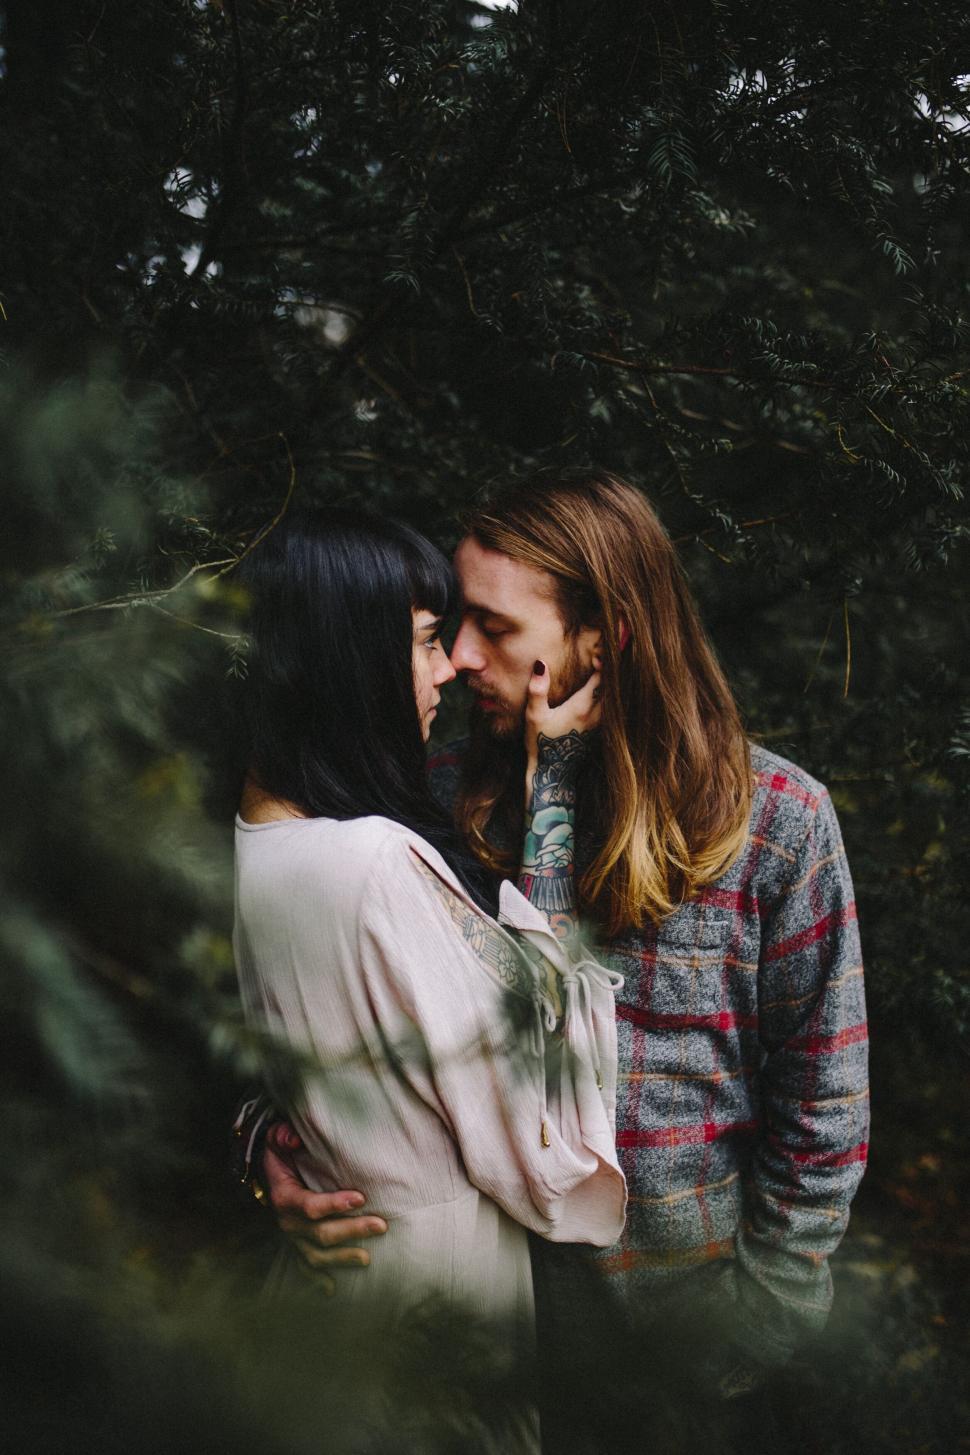 Free Image of Intimate couple embraced in forest setting 